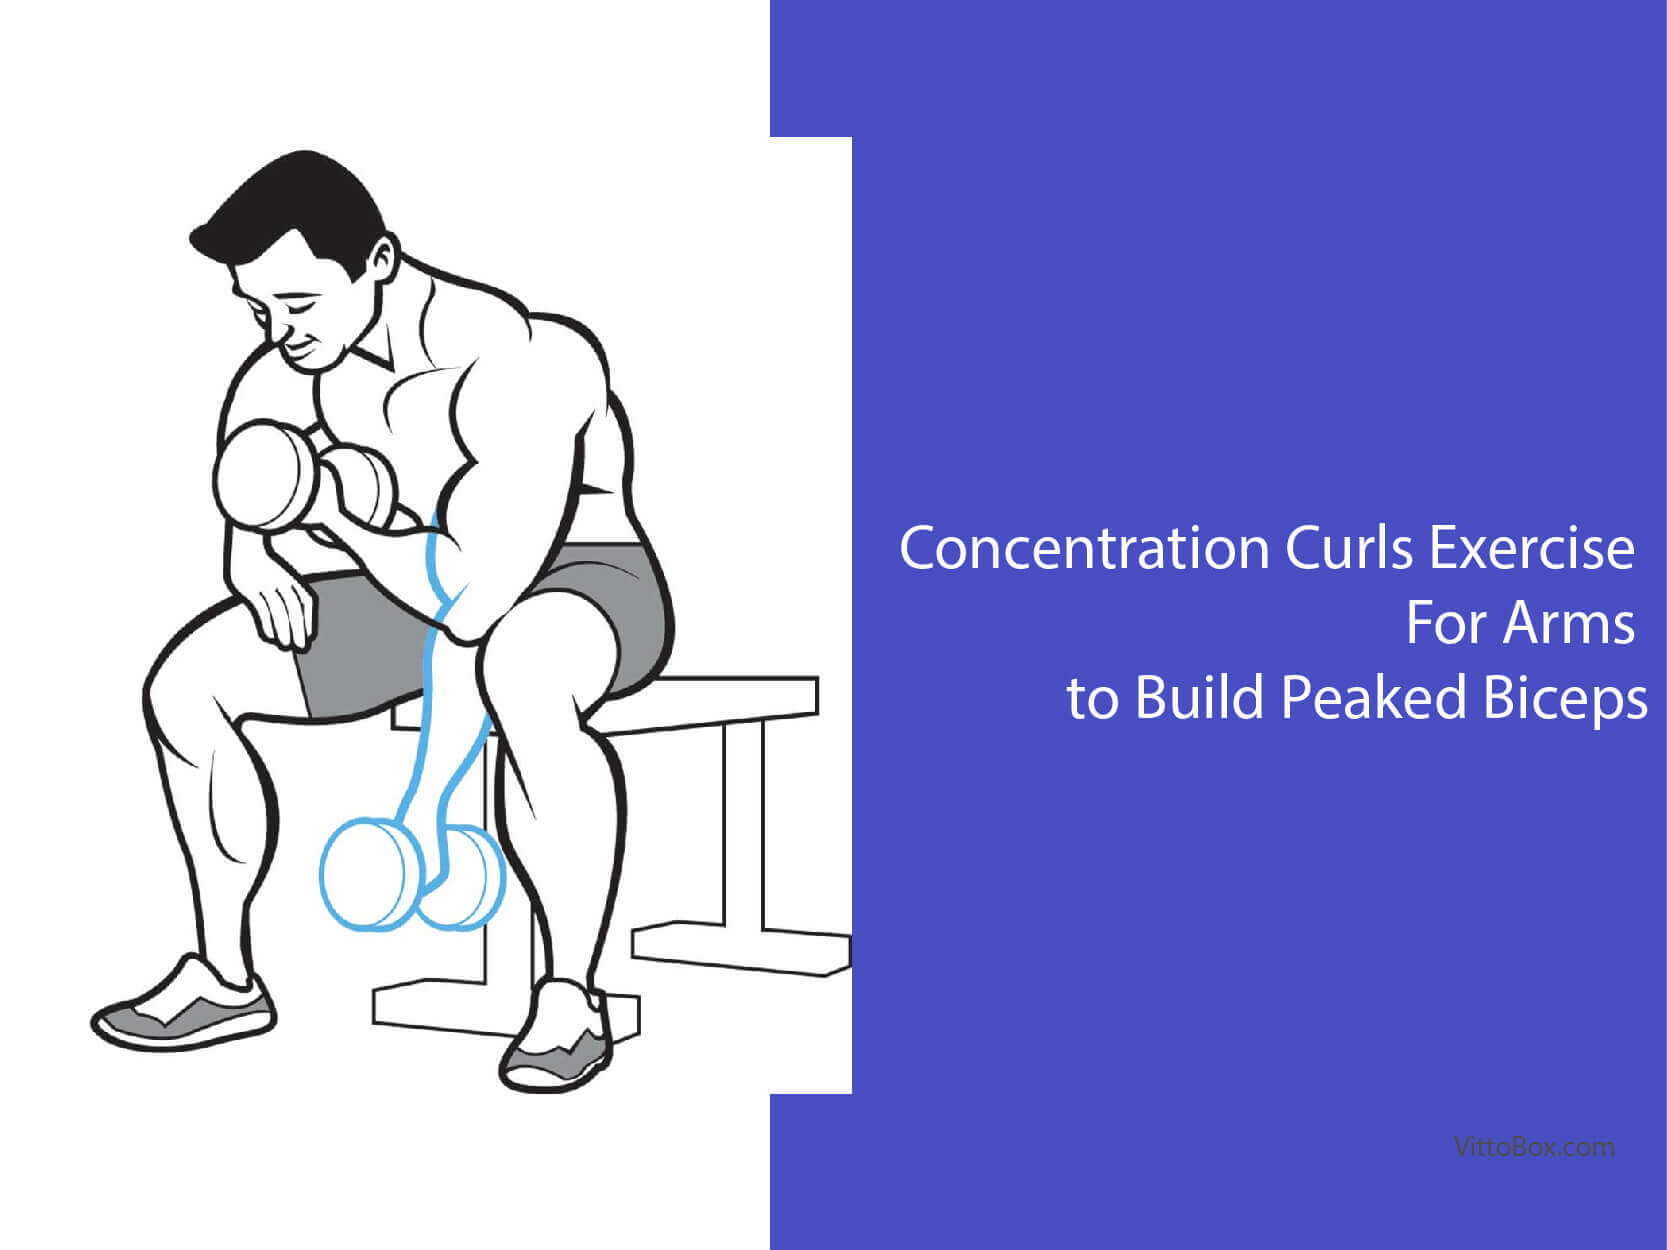 Concentration Curls Exercise For Arms To Build Peaked Biceps